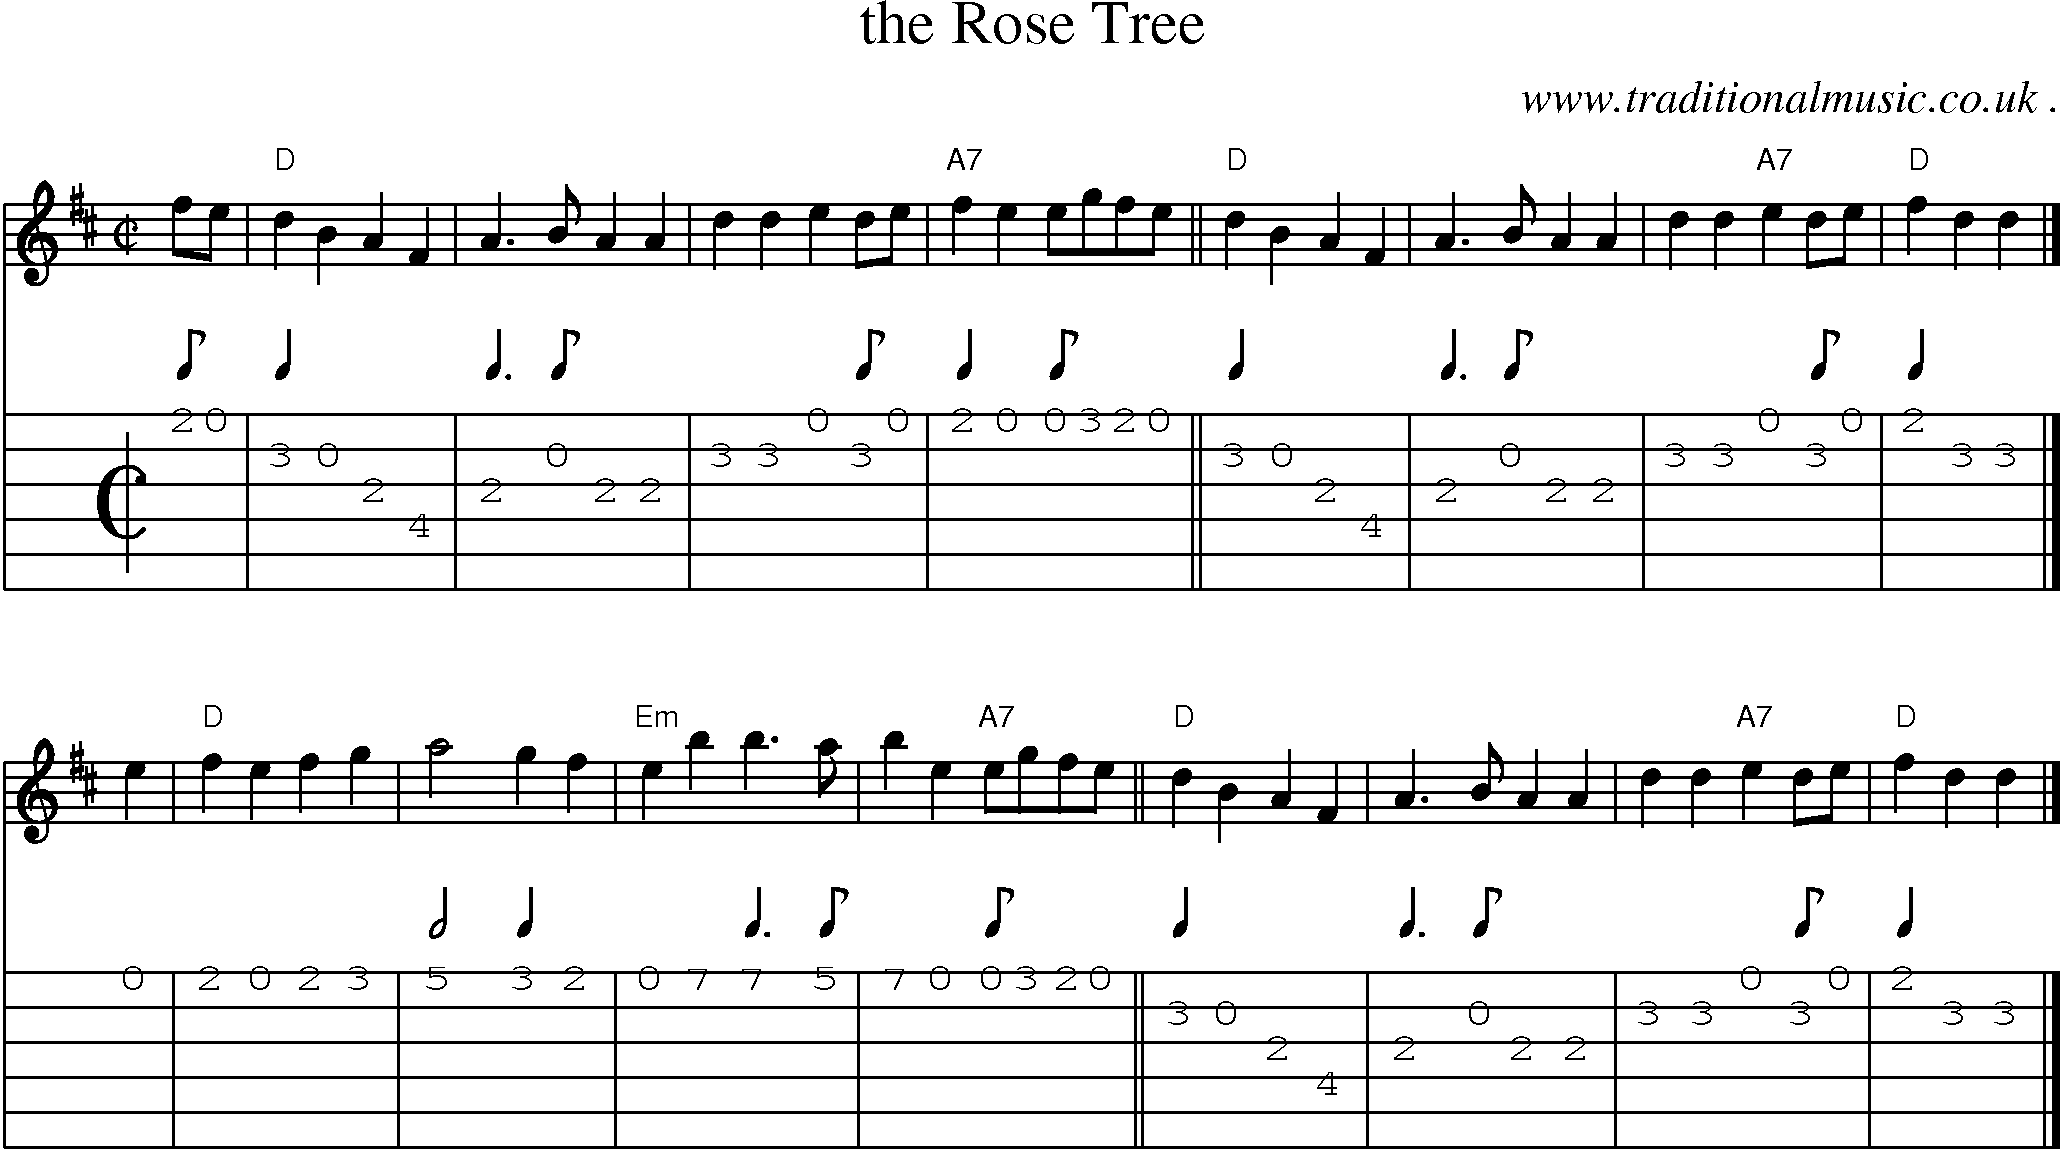 Sheet-music  score, Chords and Guitar Tabs for The Rose Tree